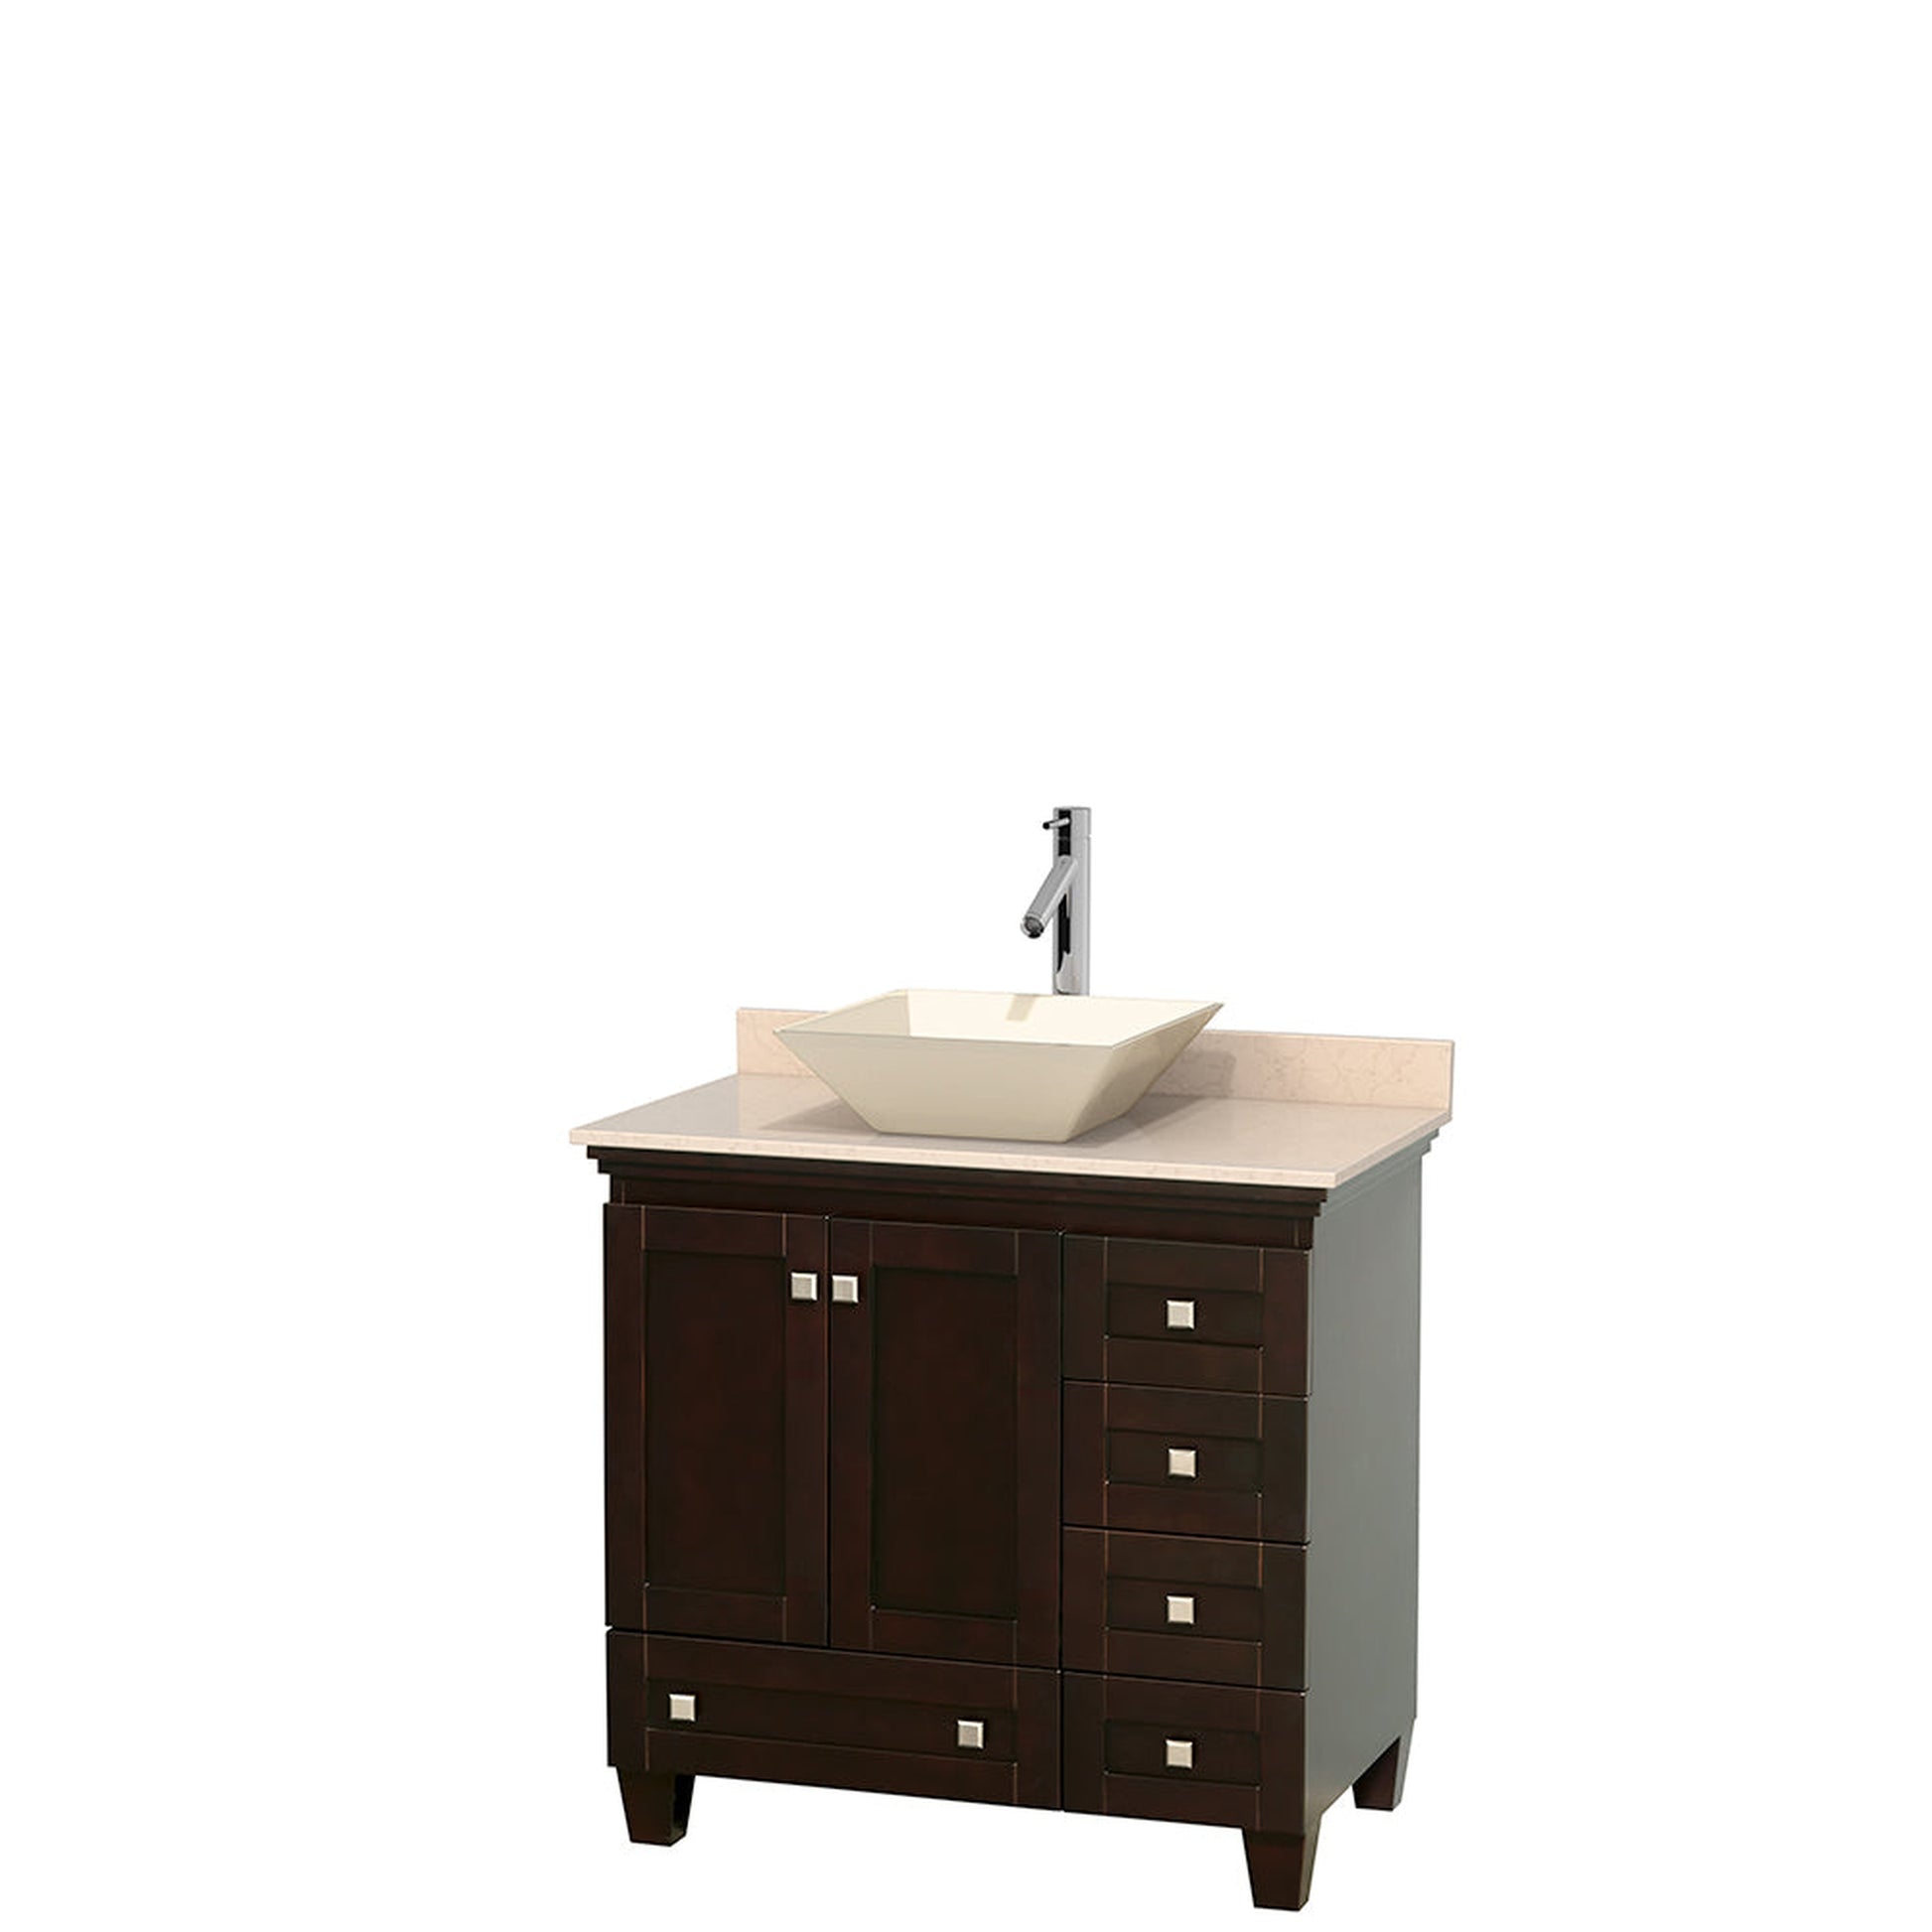 Wyndham Collection Acclaim 36" Single Bathroom Vanity in Espresso With Ivory Marble Countertop & Pyra Bone Porcelain Sink